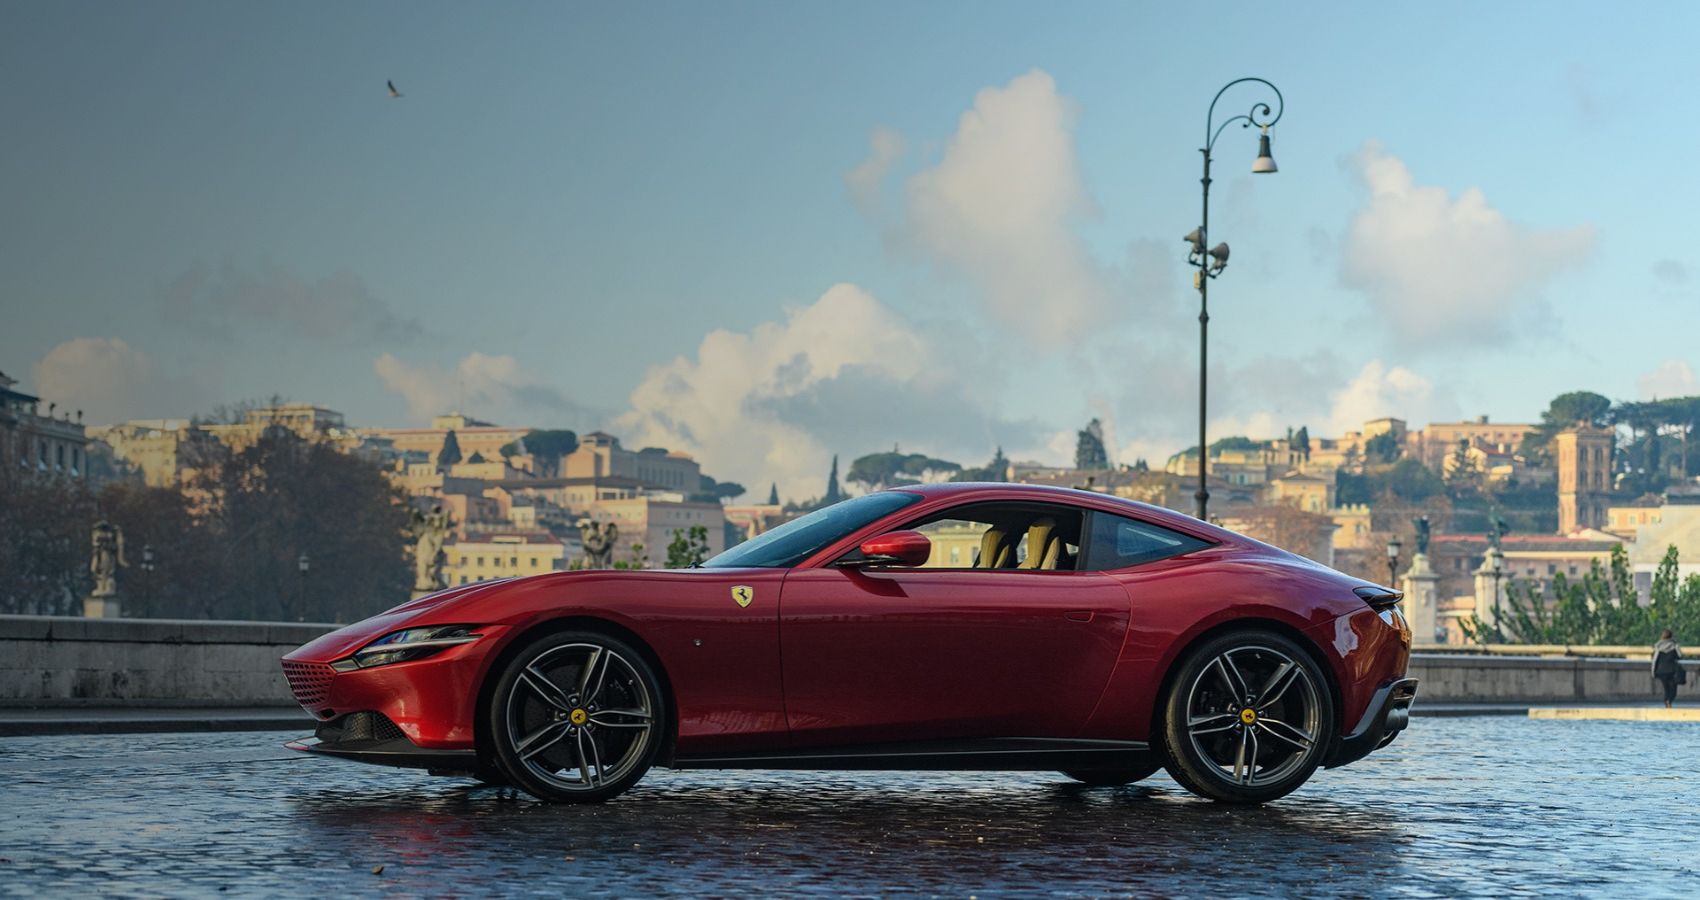 We look at why the grand tourer Ferrari Roma is a trusted consort in the  fine art of living - The Peak Magazine